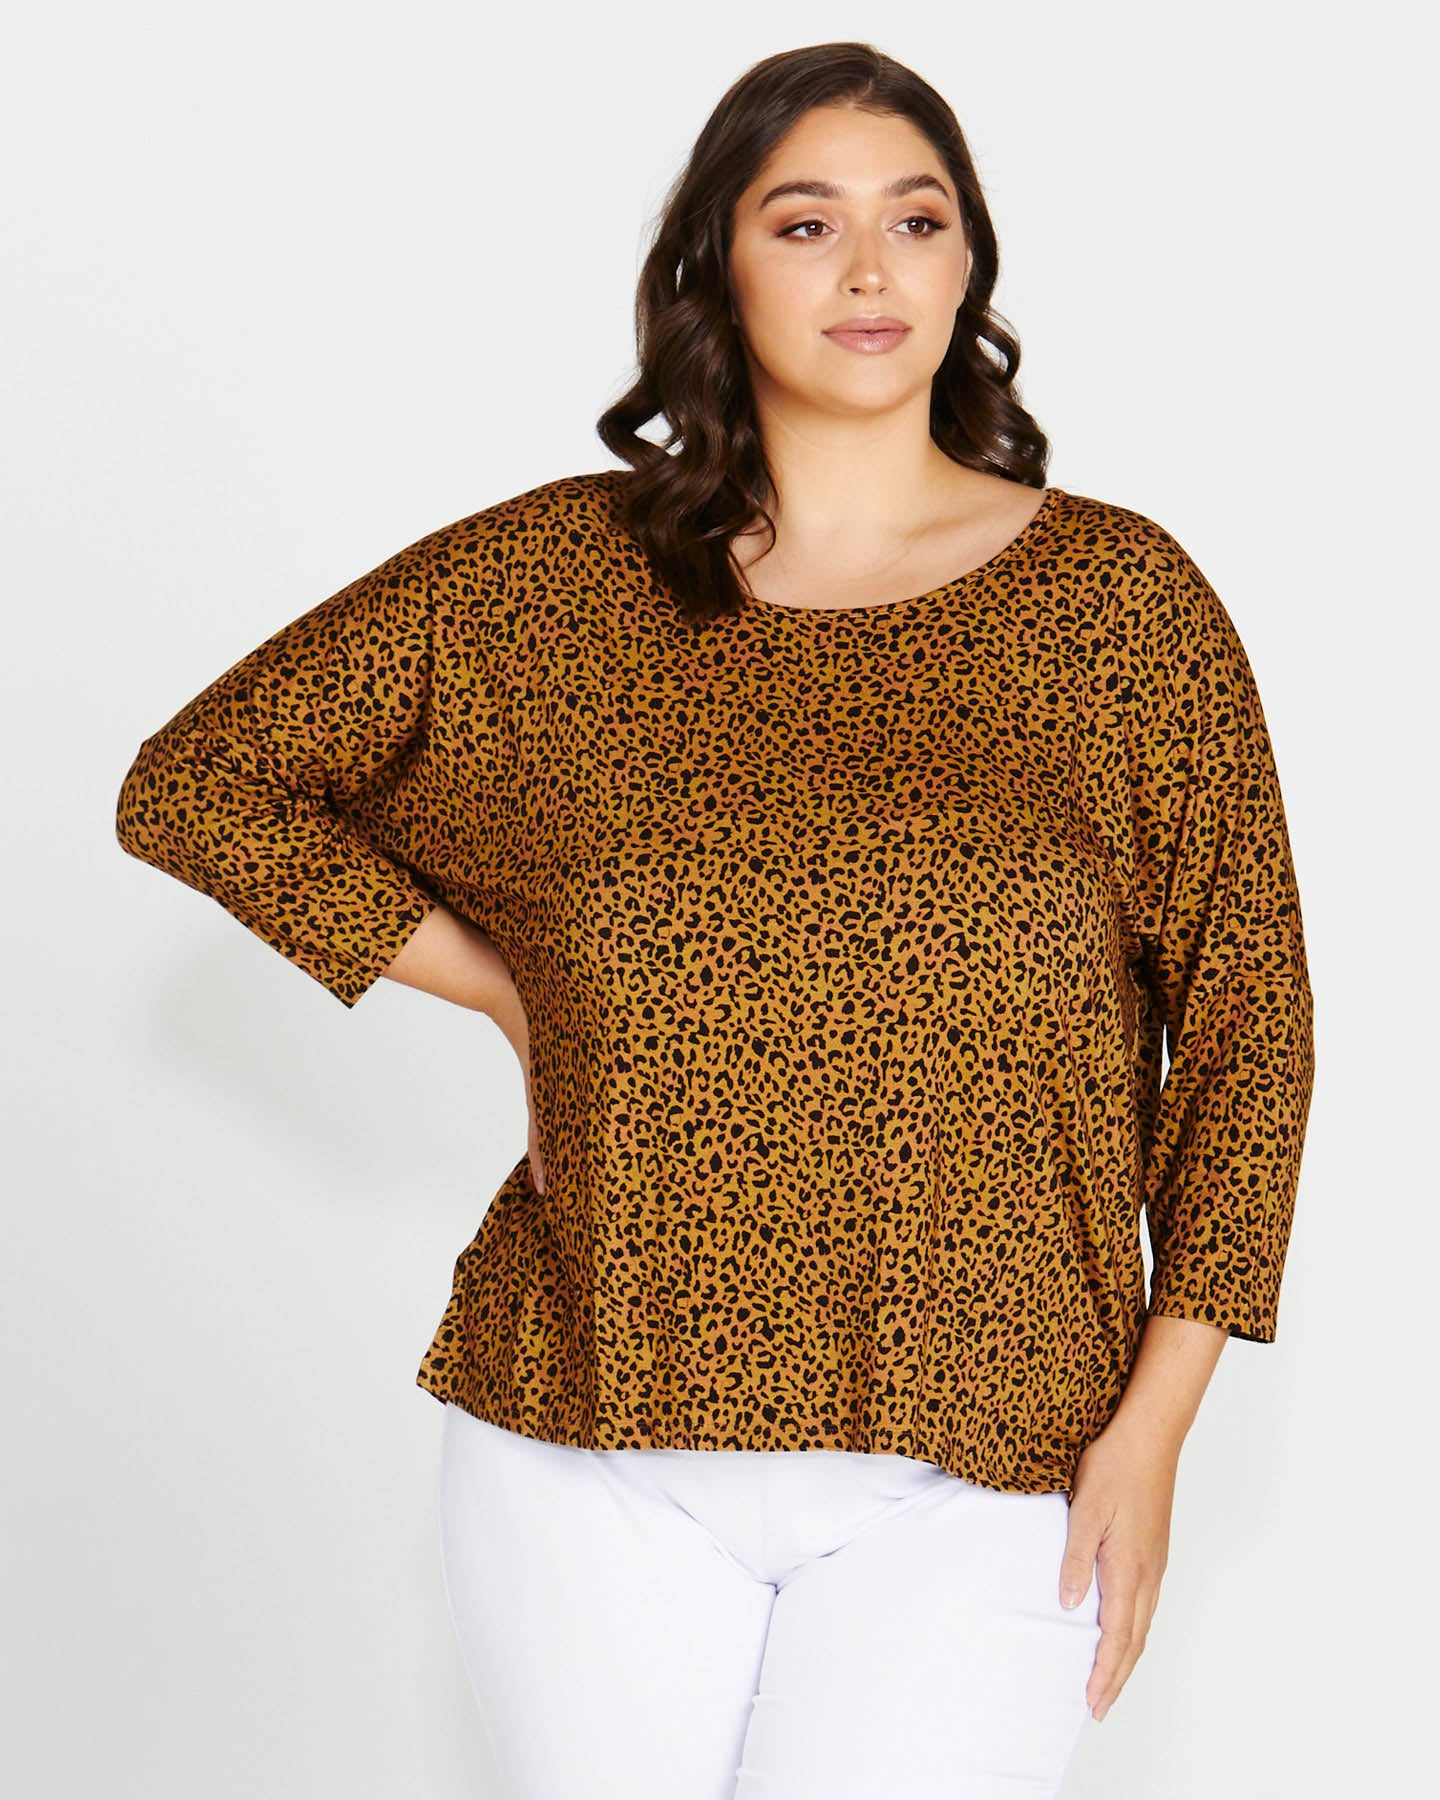 Leopard Prints Are Taking Over Menswear and These Are the Best